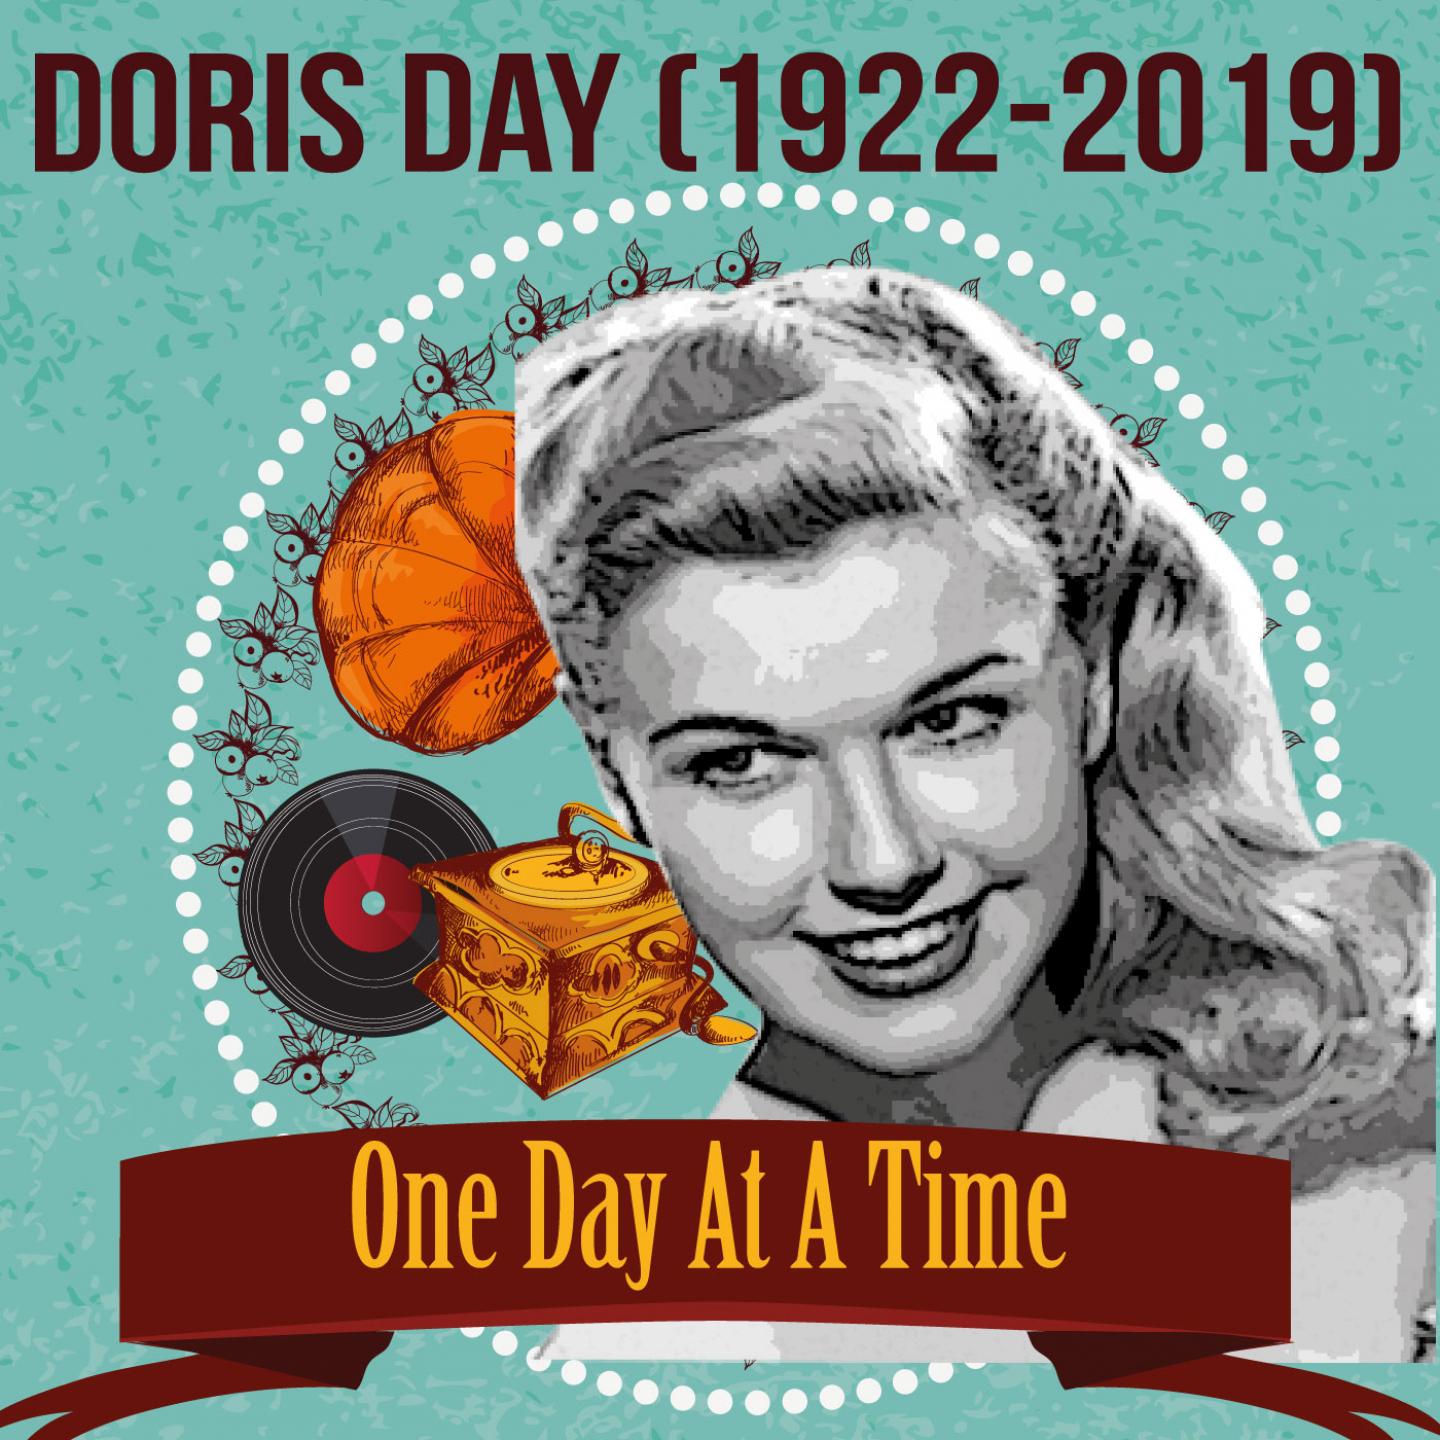 Doris Day (1922-2019) (One Day at a Time)